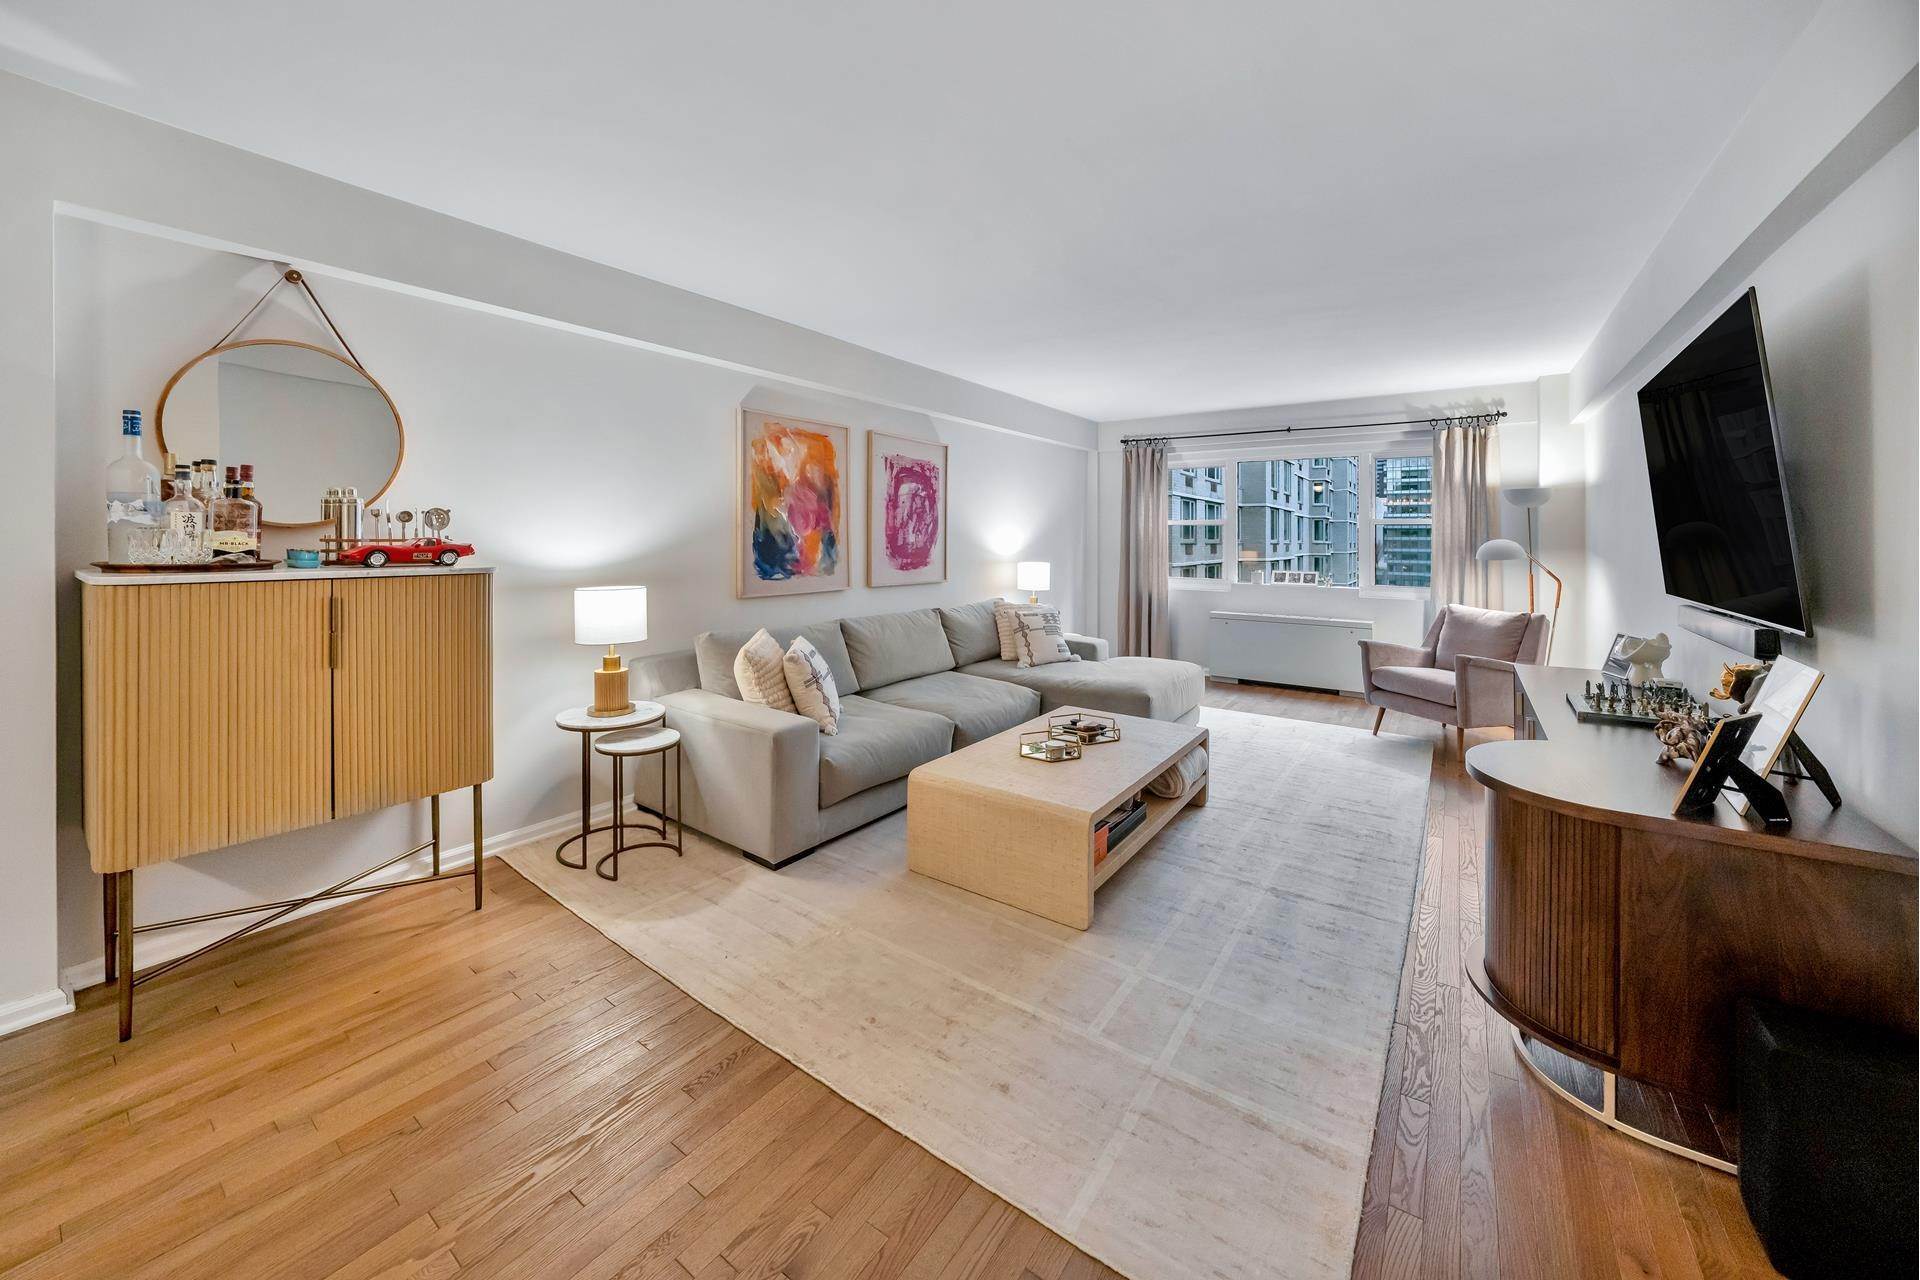 Cooperative for Sale at Midtown East, Manhattan, NY 10022